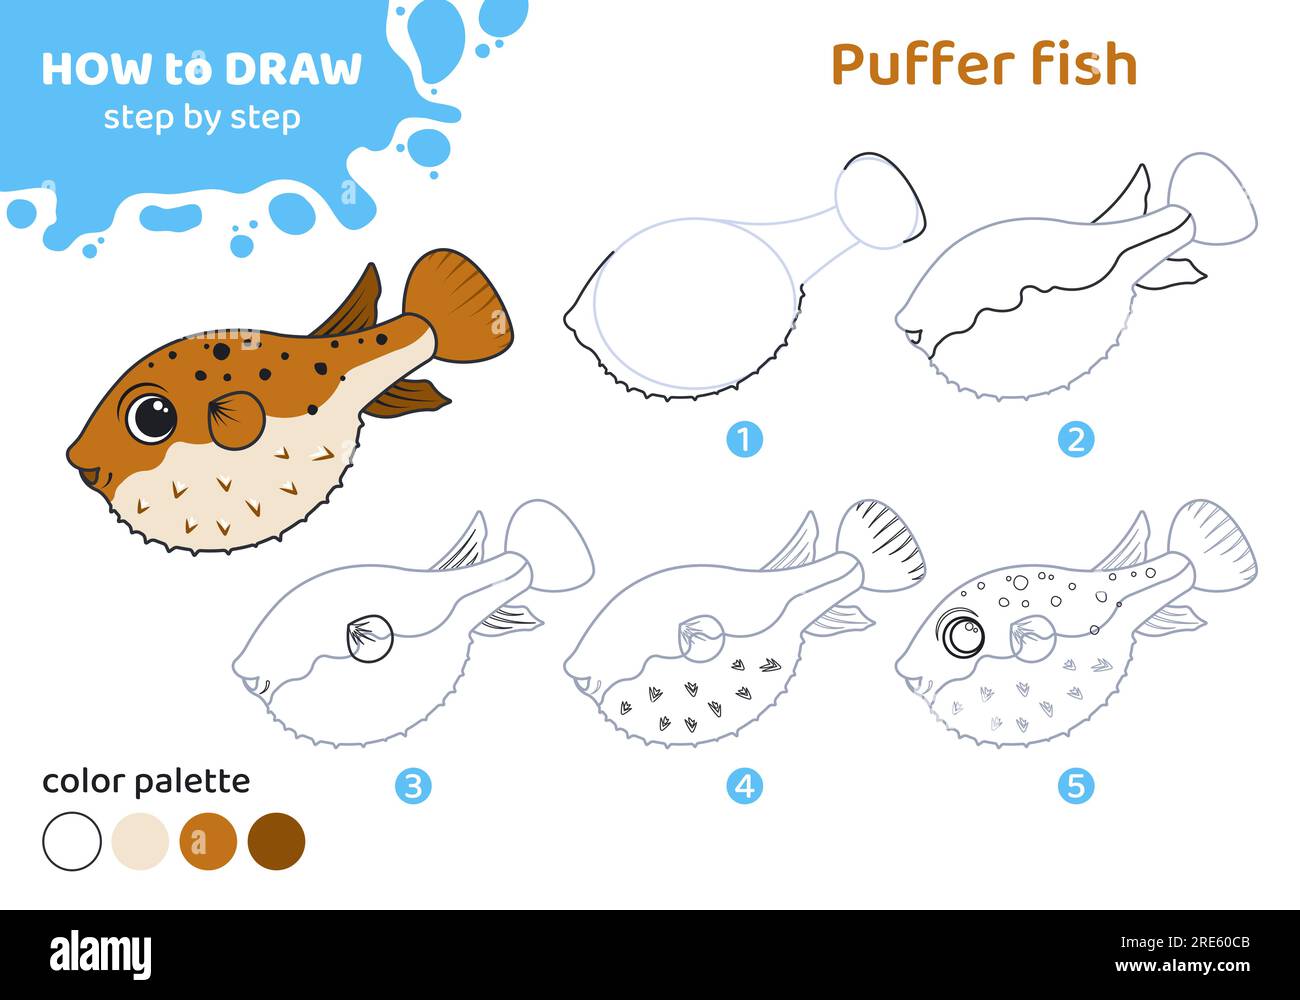 Fish Drawing For Kids - Drawing for kids | Facebook-saigonsouth.com.vn